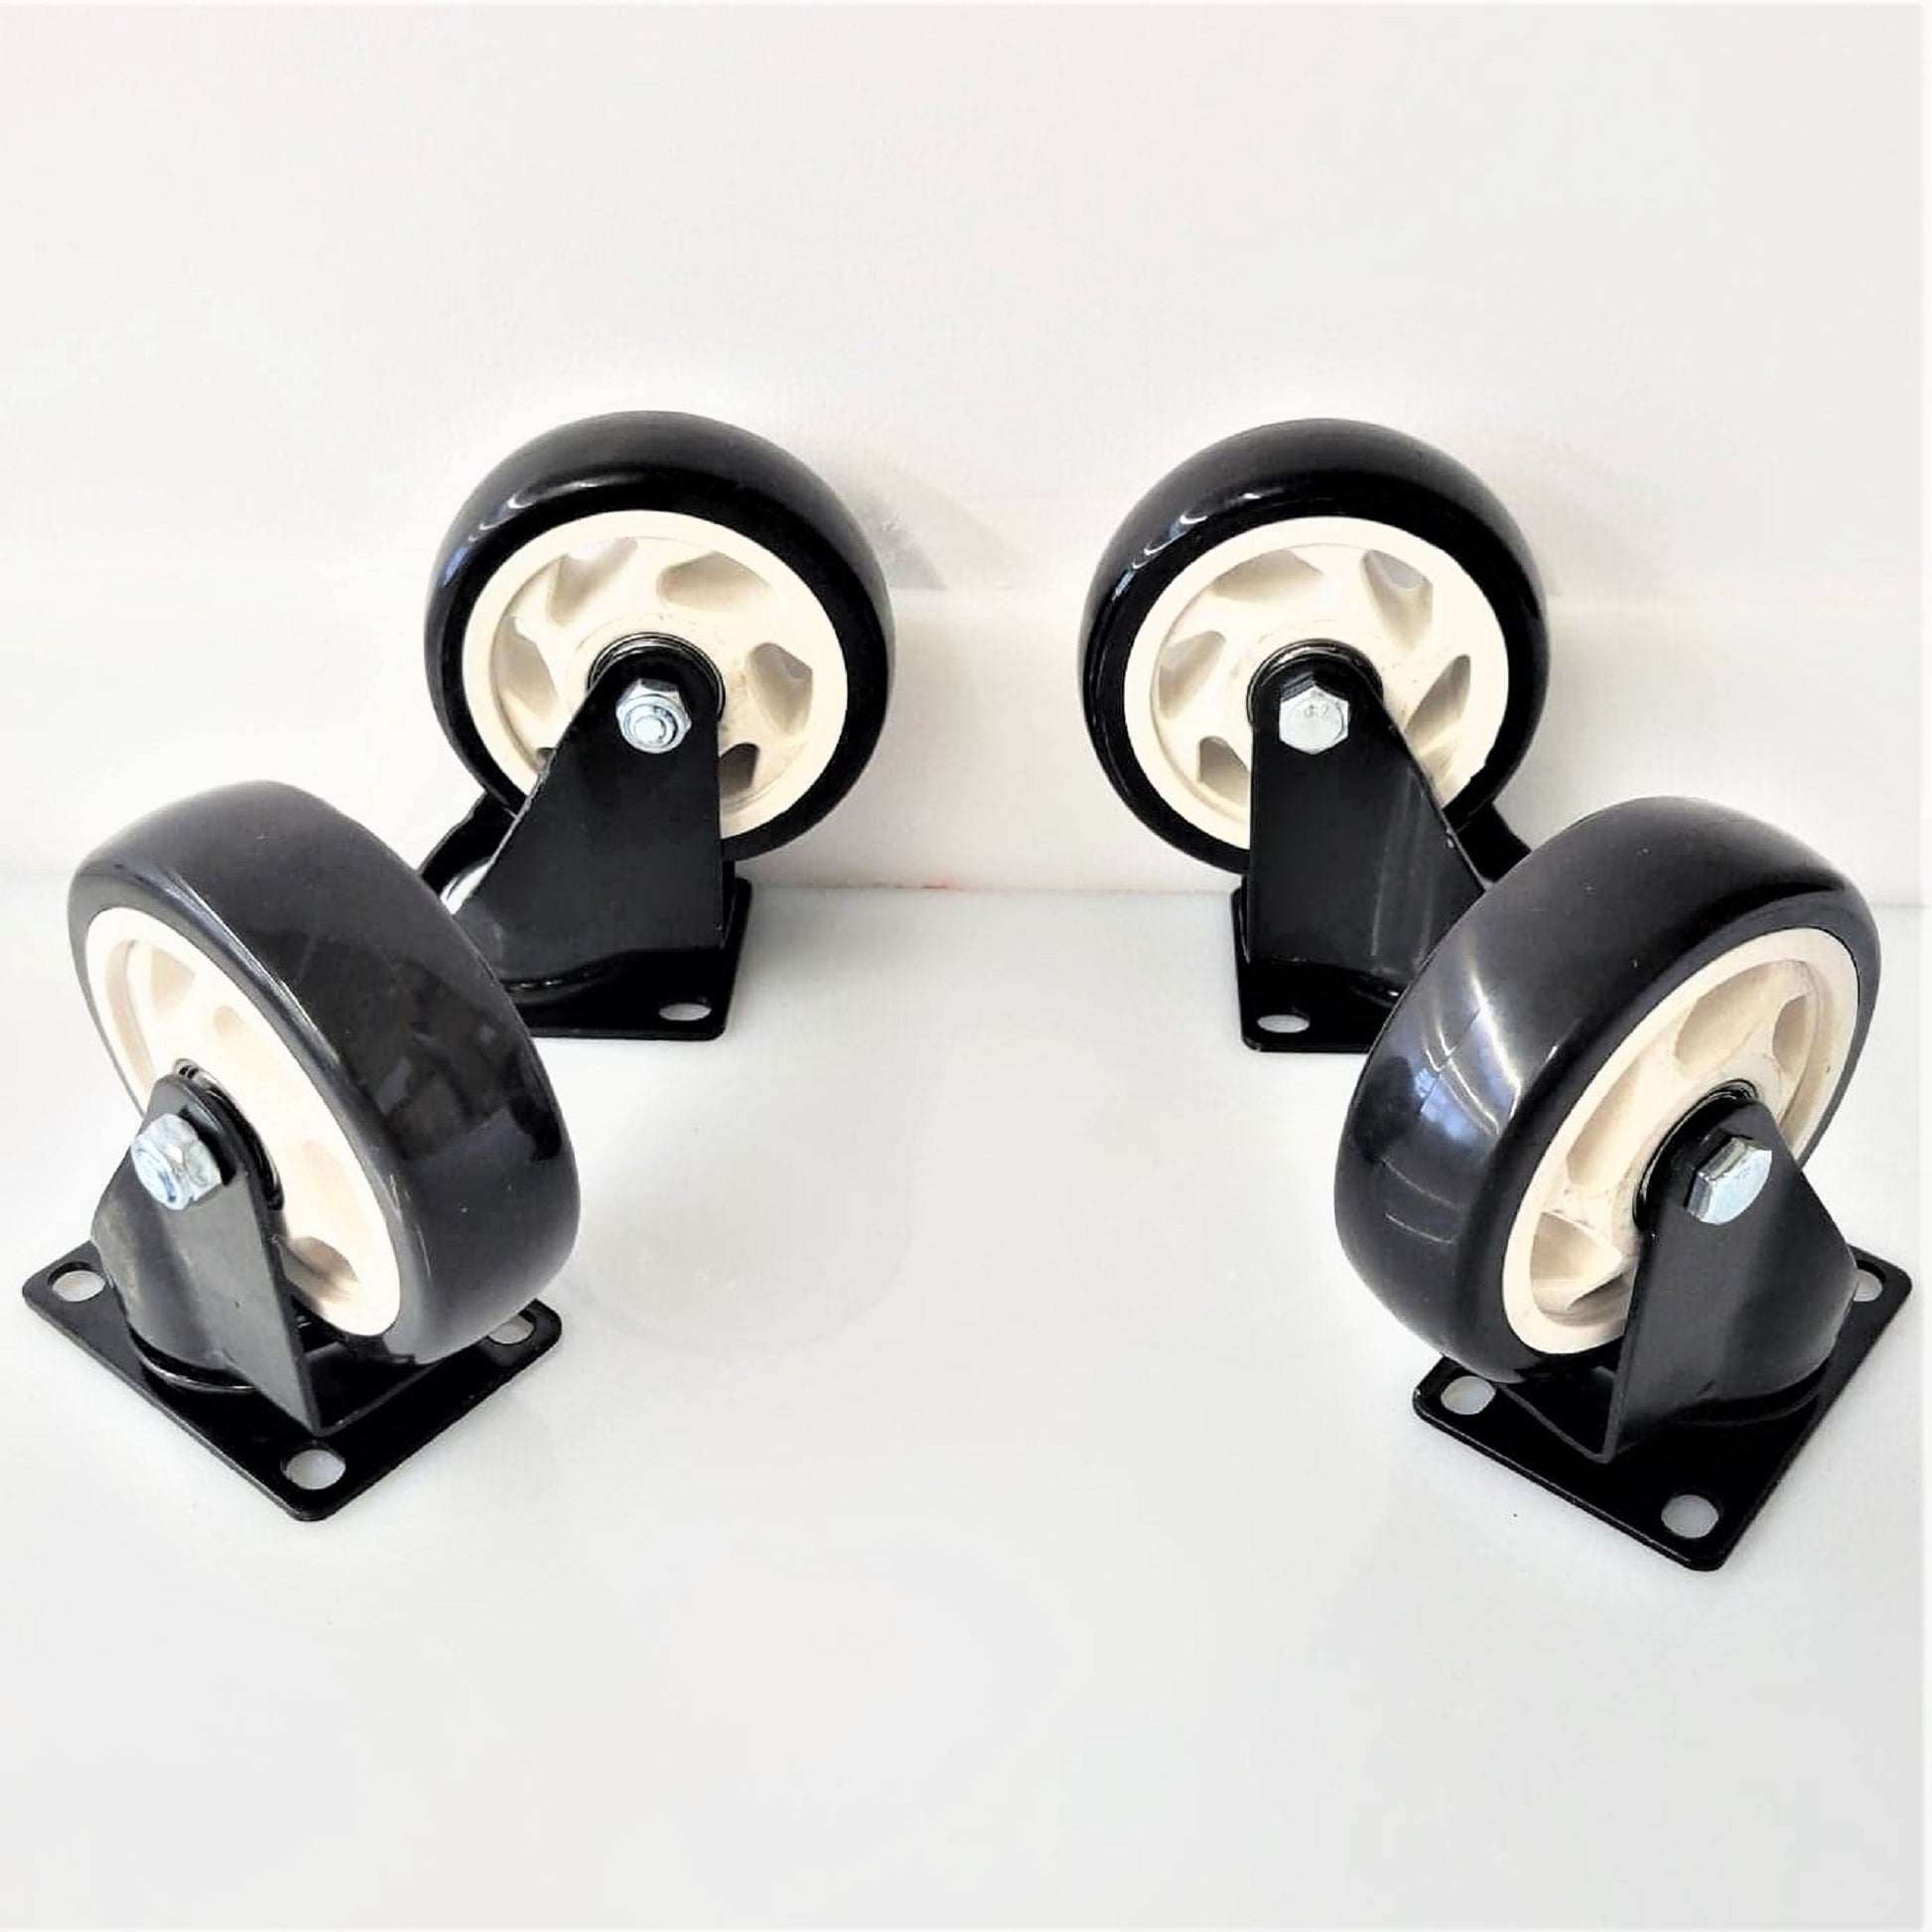 PVC Casters, Metal Casters, Caster Wheels, Furniture Feet, Cabinet Casters, Cabinet Wheels